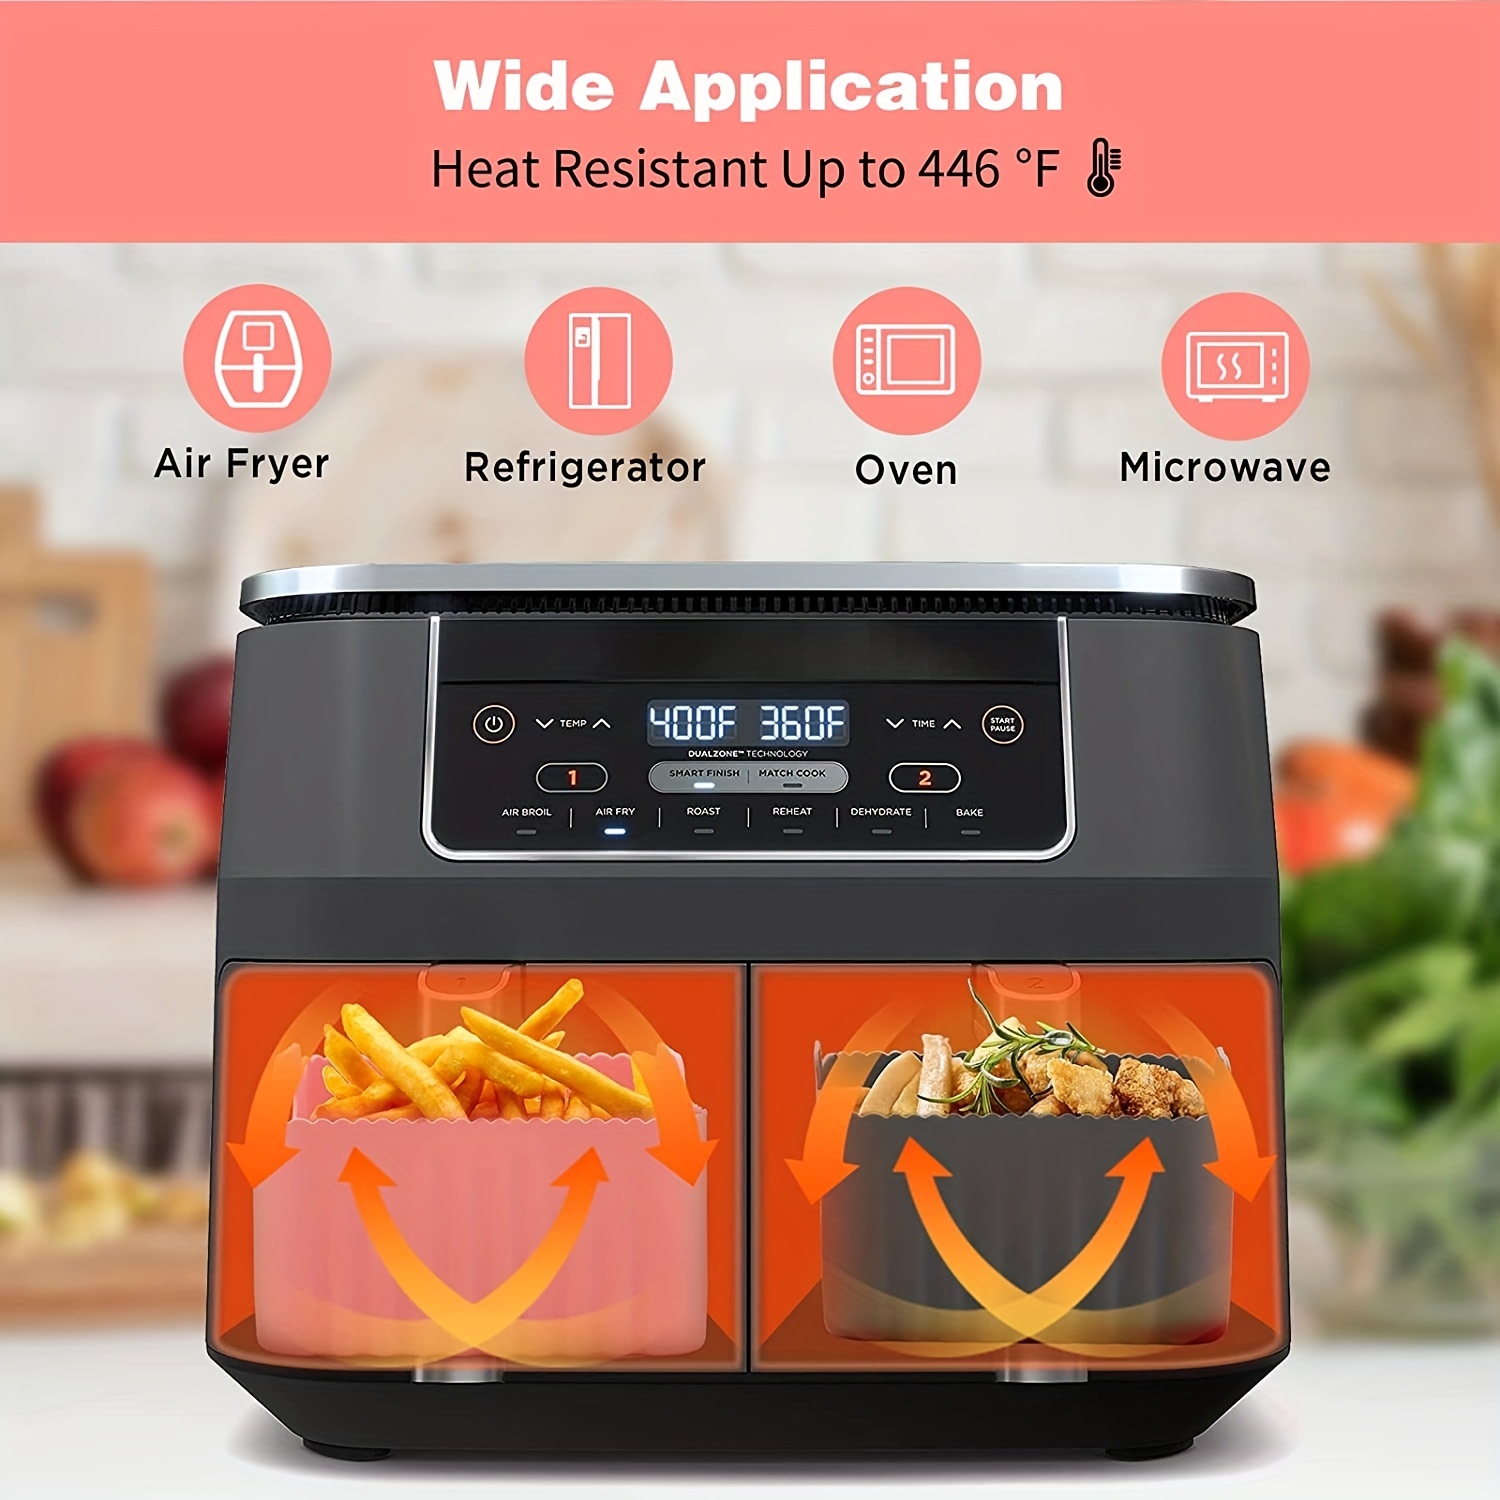 Silicone Air Fryer Liners , Reusable Silicone Dual Basket Air Fryer Liner  7.67''x5